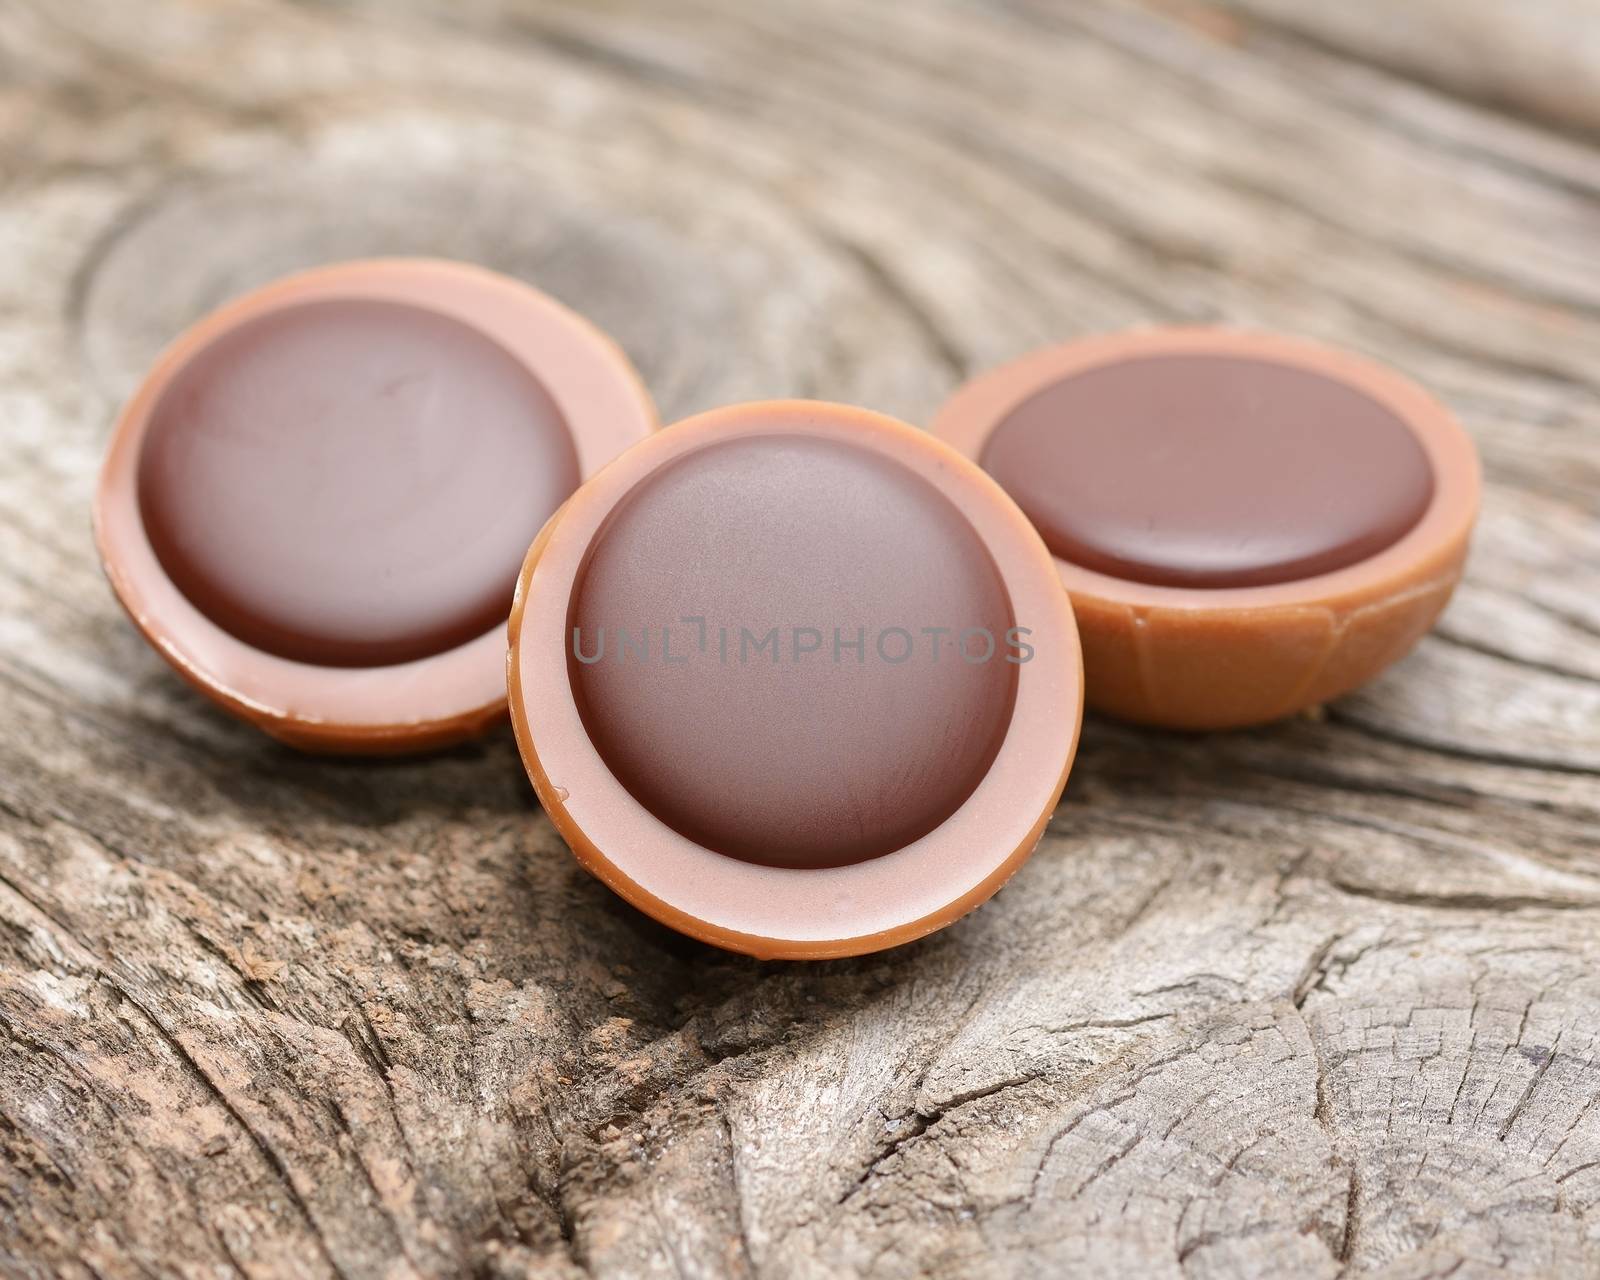 A hazelnut in caramel with creamy nougat and chocolate on wooden background by comet